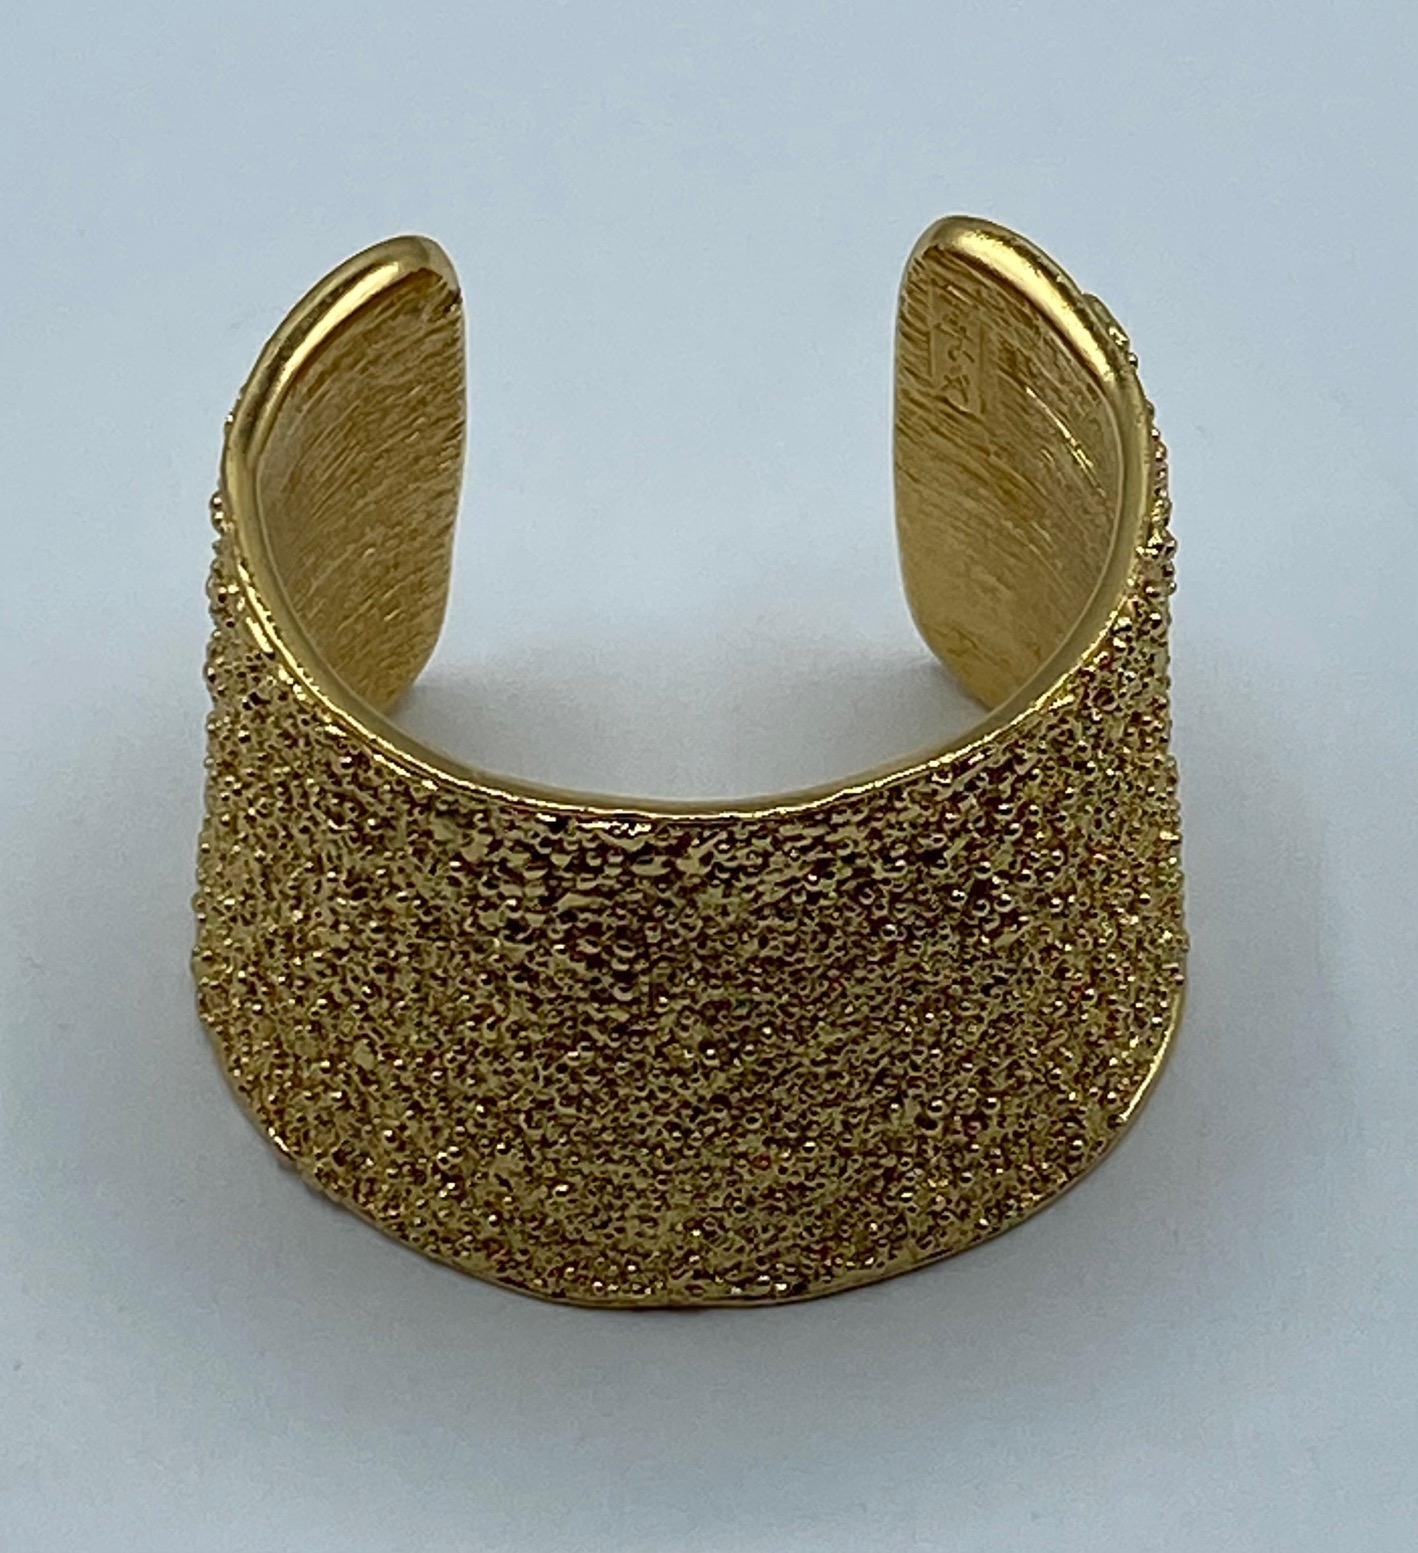 Presented is an impressive vintage Yves Saint Laurent cuff bracelet from the mid 1980s to early 1990s. The shape is lightly oval and tapers from 2.75 inches at the top widest points to 2.38 at the bottom. The hight of the cuff is a substantial 2.13